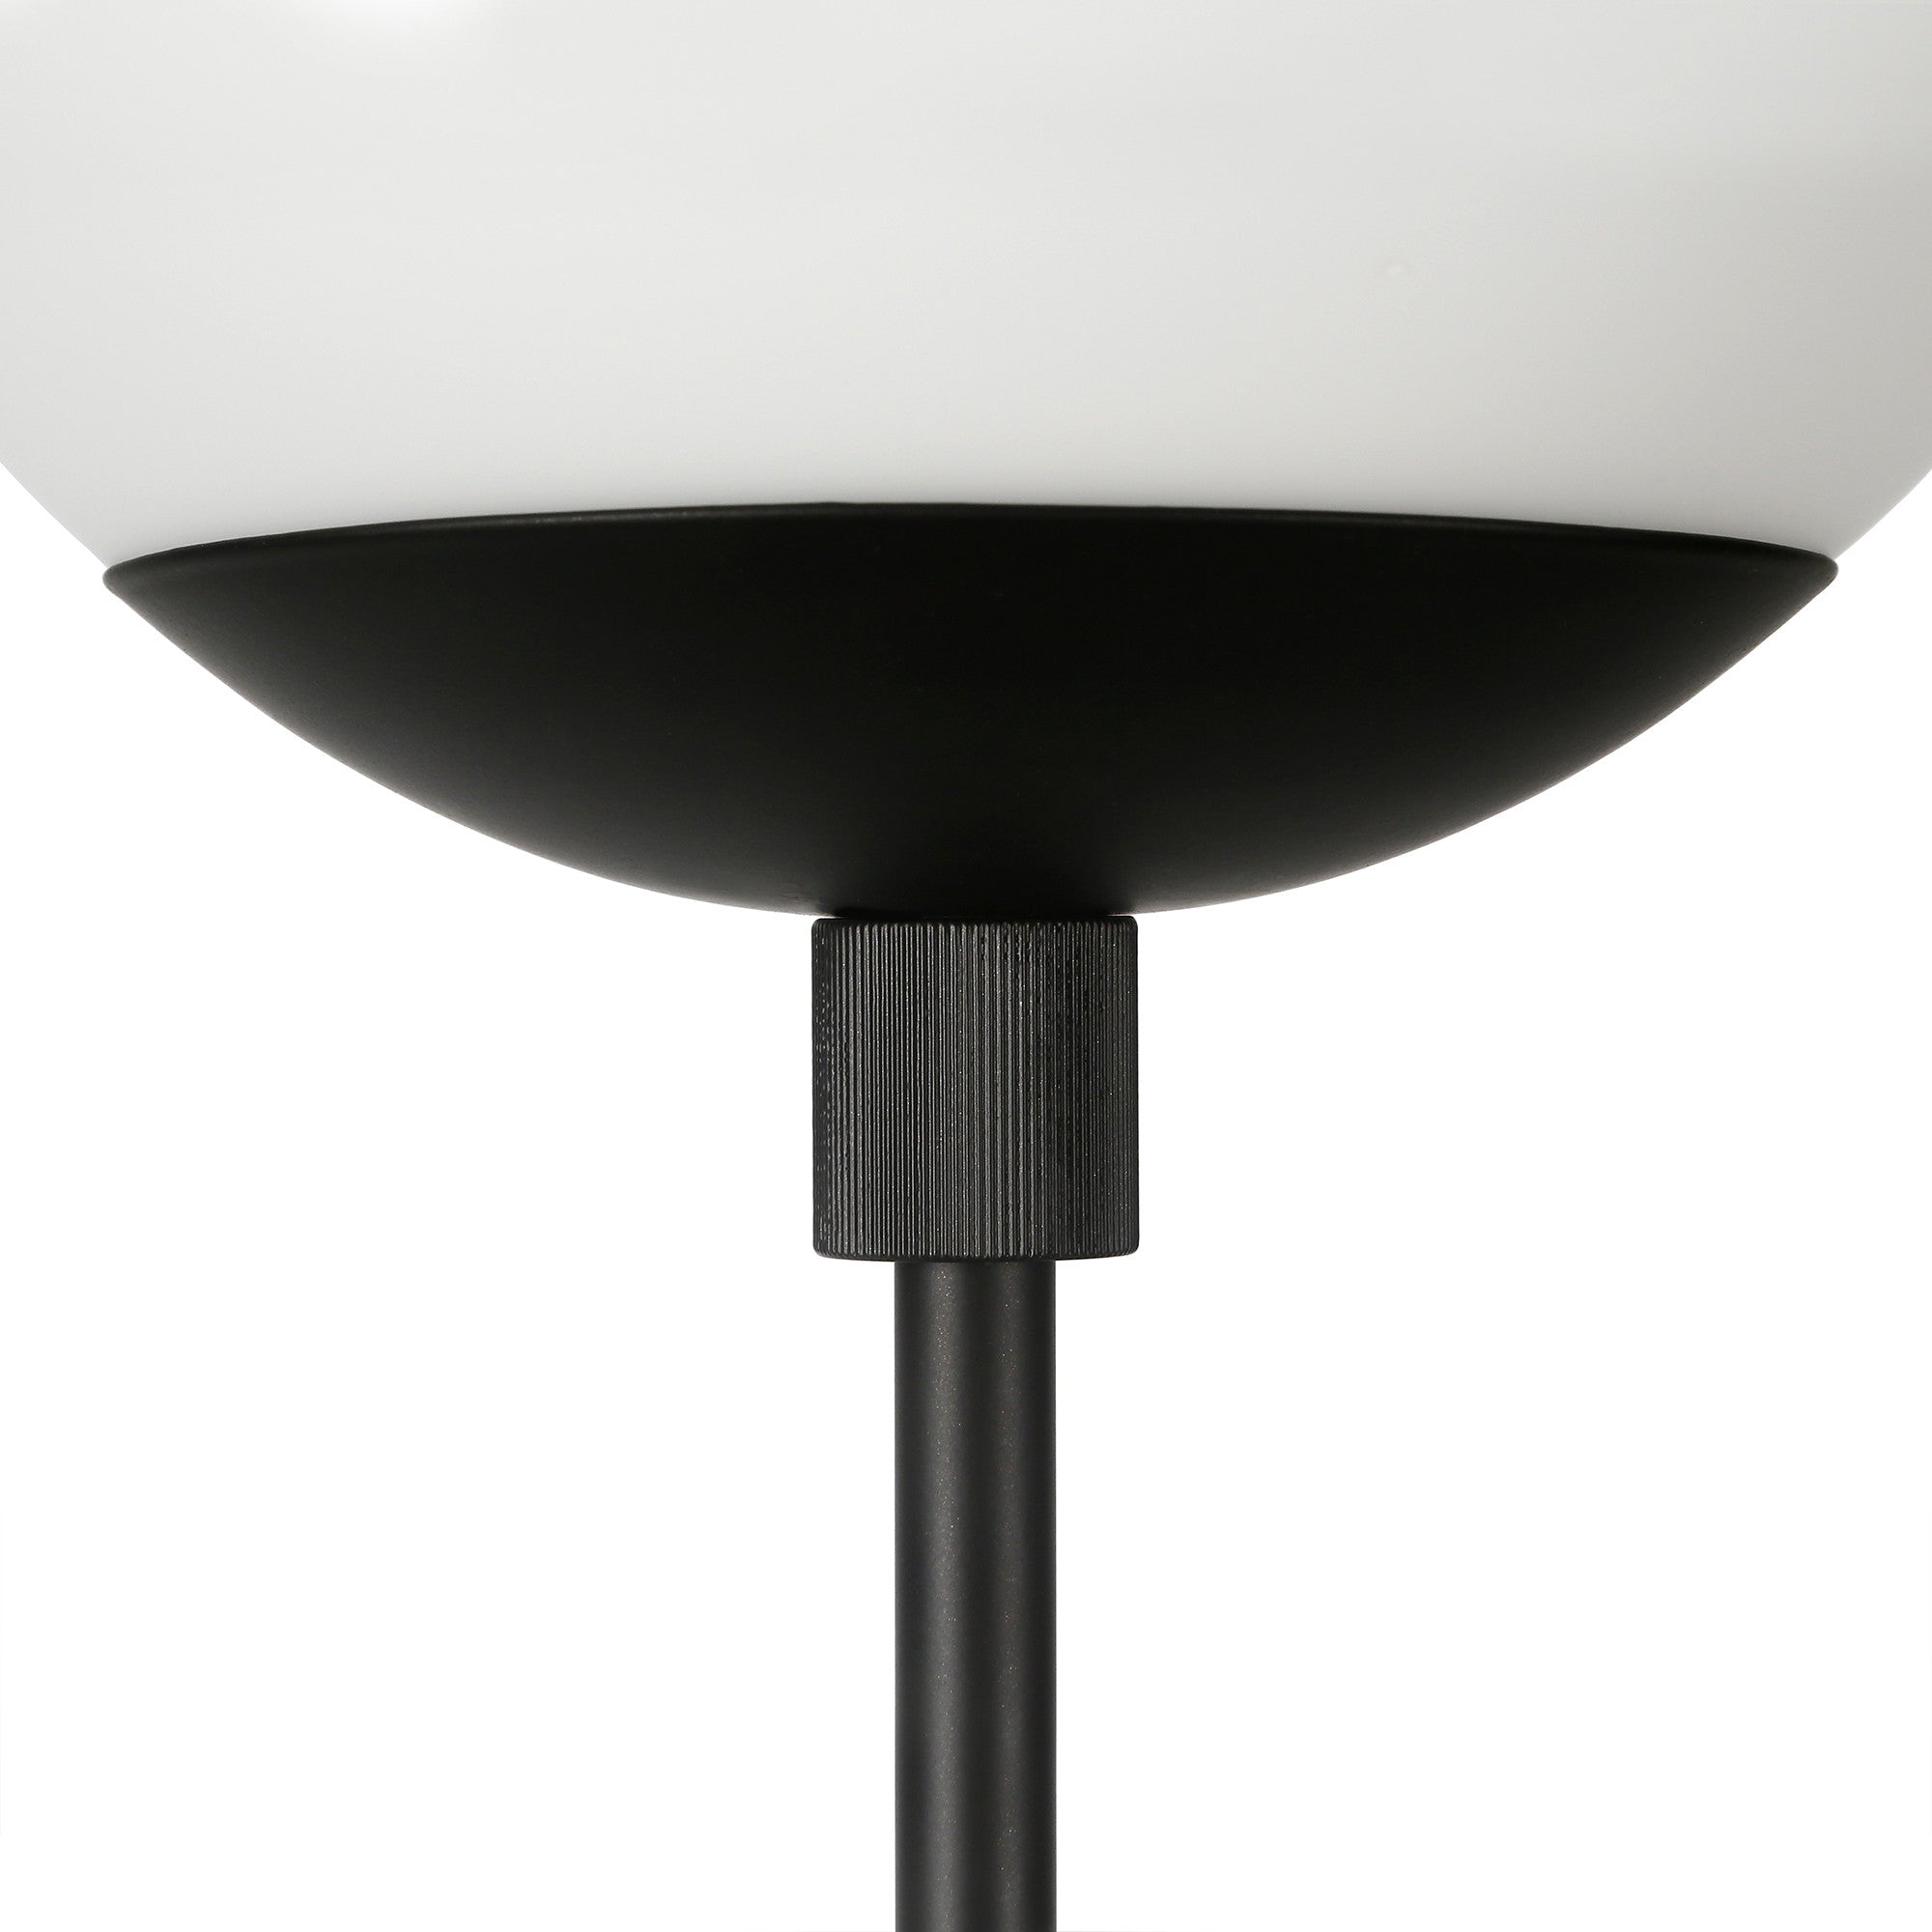 21" Black Metal Globe Table Lamp With Clear Globe Shade